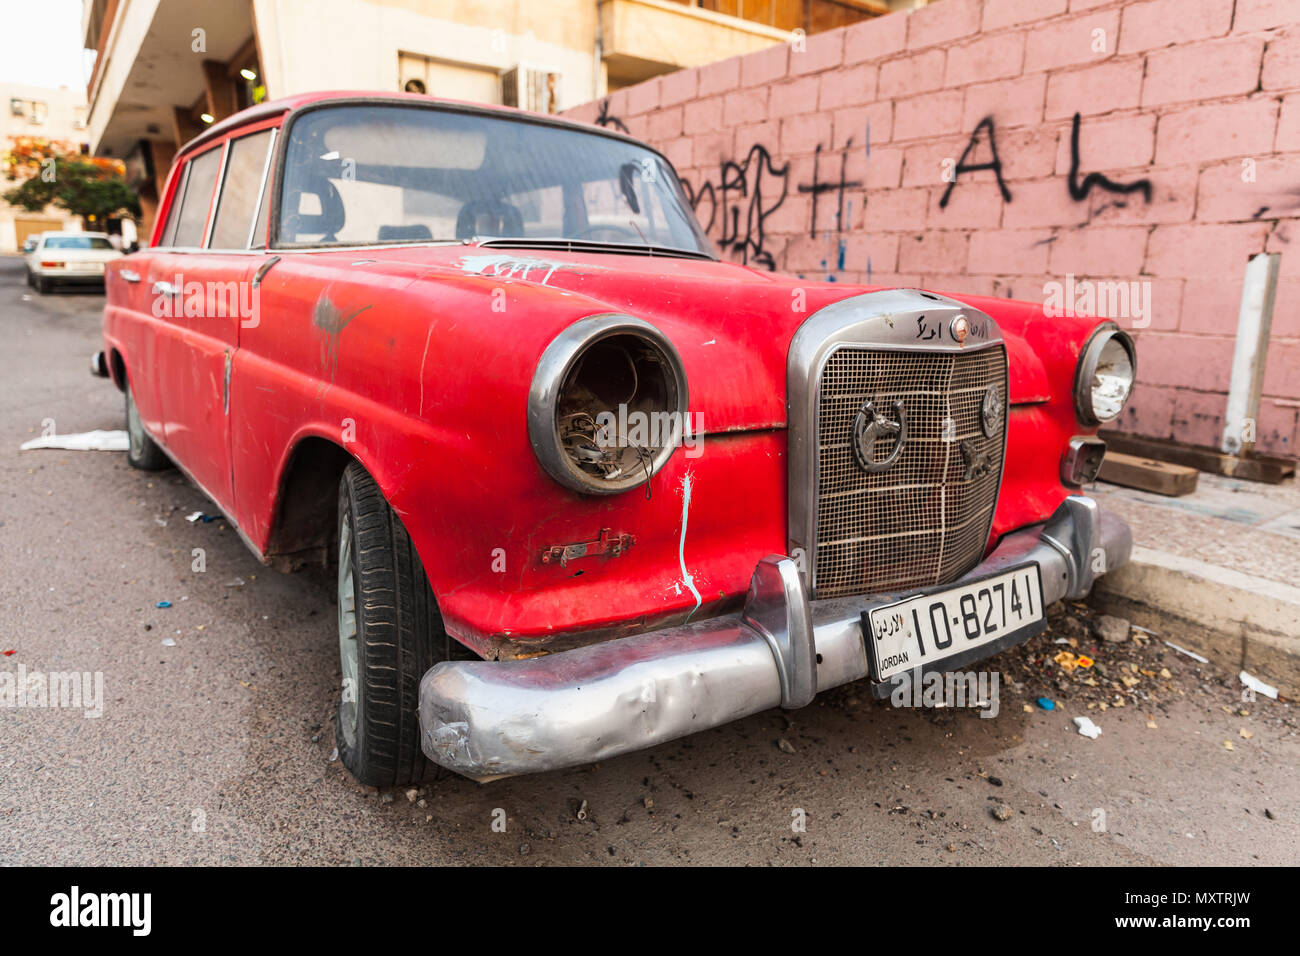 Aqaba, Jordan - May 18, 2018: Red abandoned Mercedes-Benz W110 190, midsize automobile stands on a roadside in Aqaba city, close-up photo Stock Photo